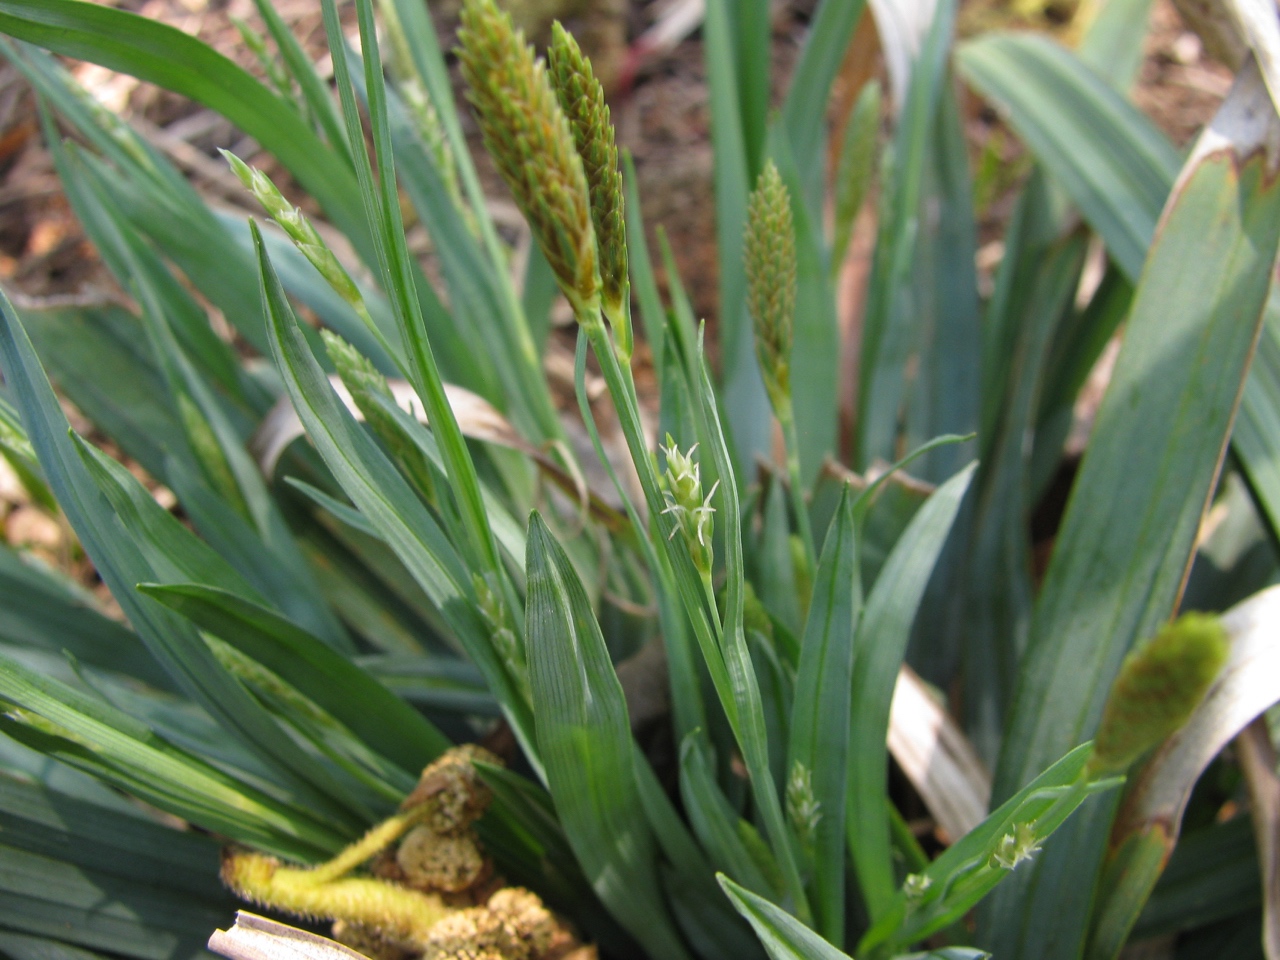 The Scientific Name is Carex platyphylla. You will likely hear them called Broadleaf Sedge, Silver Sedge. This picture shows the Emerging female spikelets in early April of Carex platyphylla